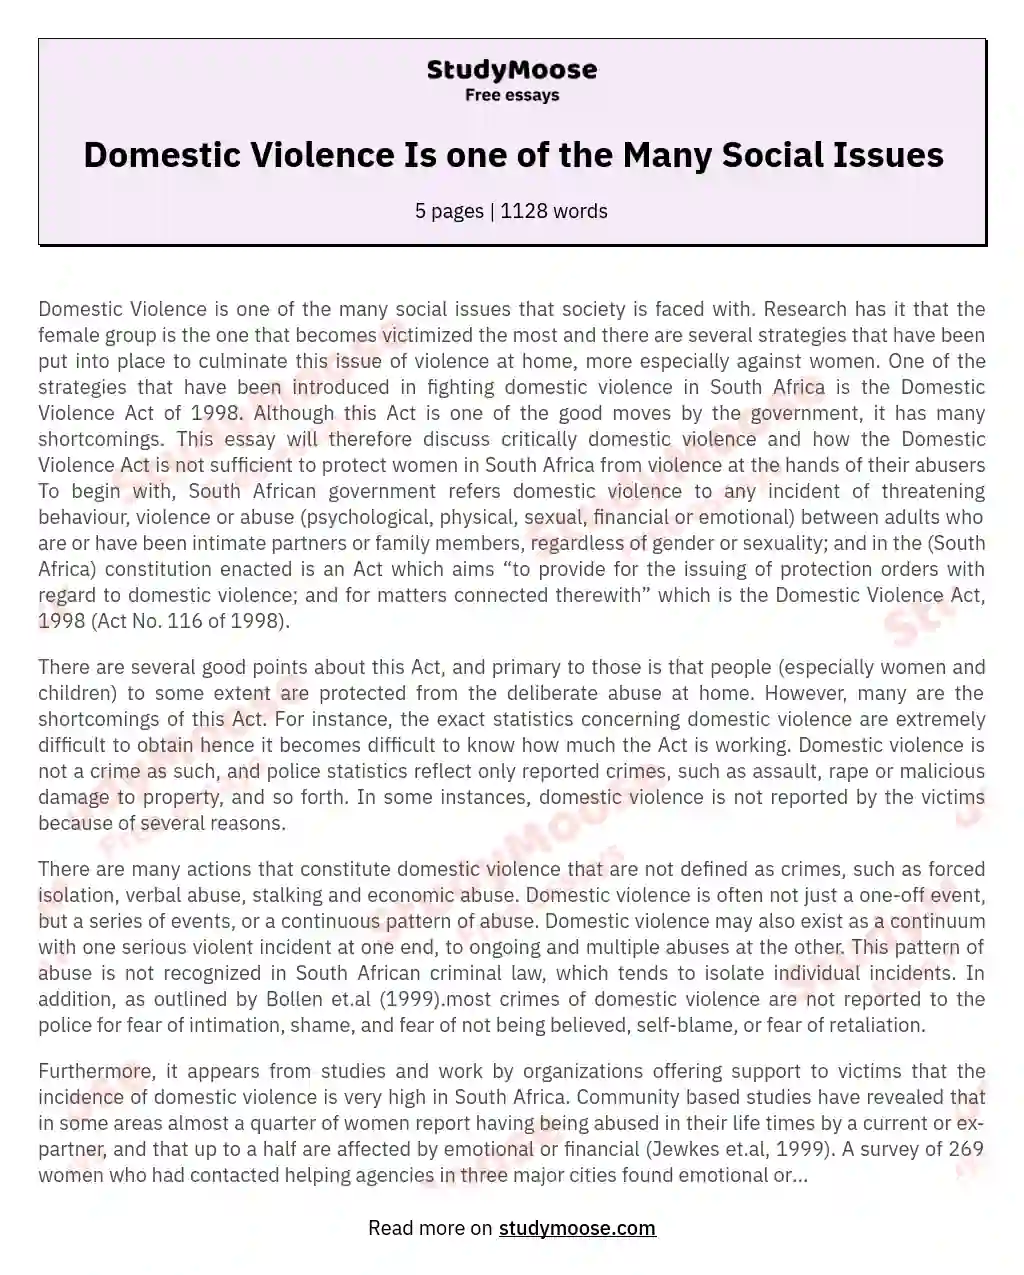 Domestic Violence Is one of the Many Social Issues essay